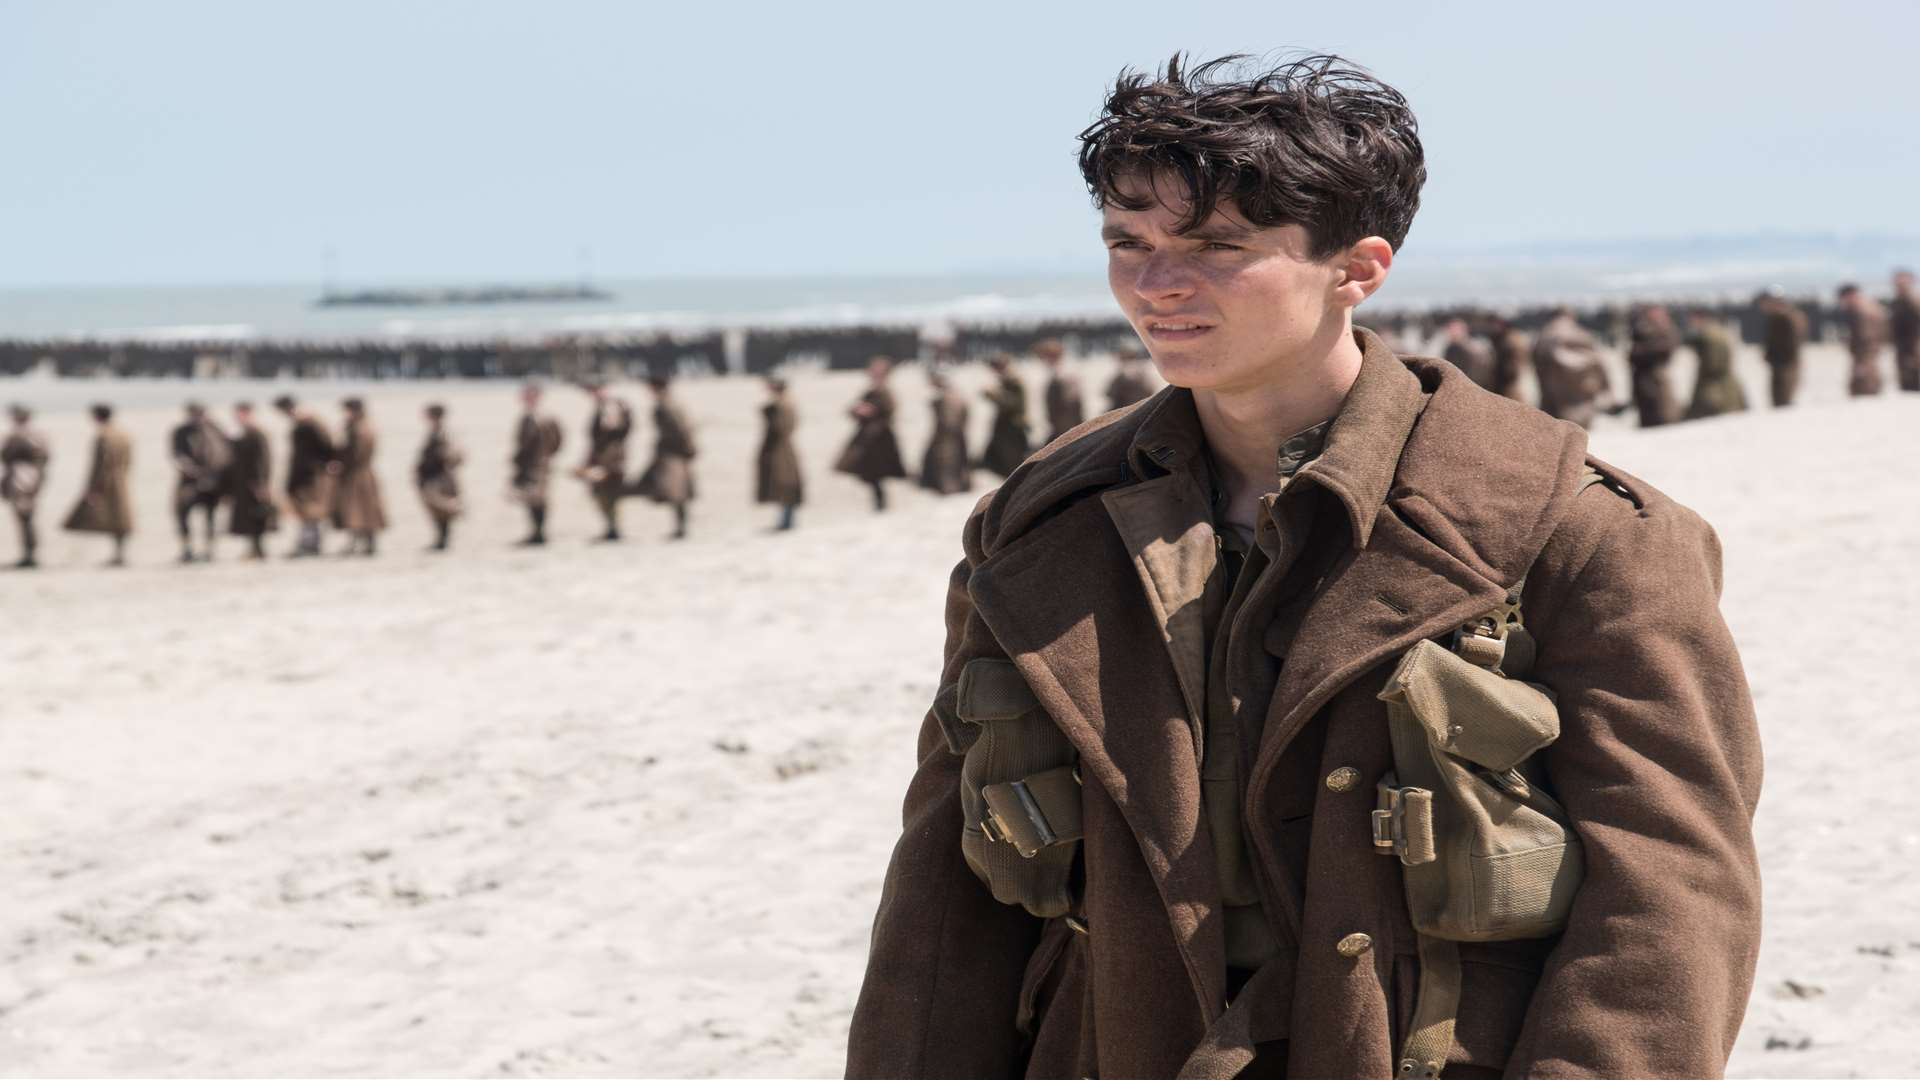 The film Dunkirk is scheduled to be released on July 21